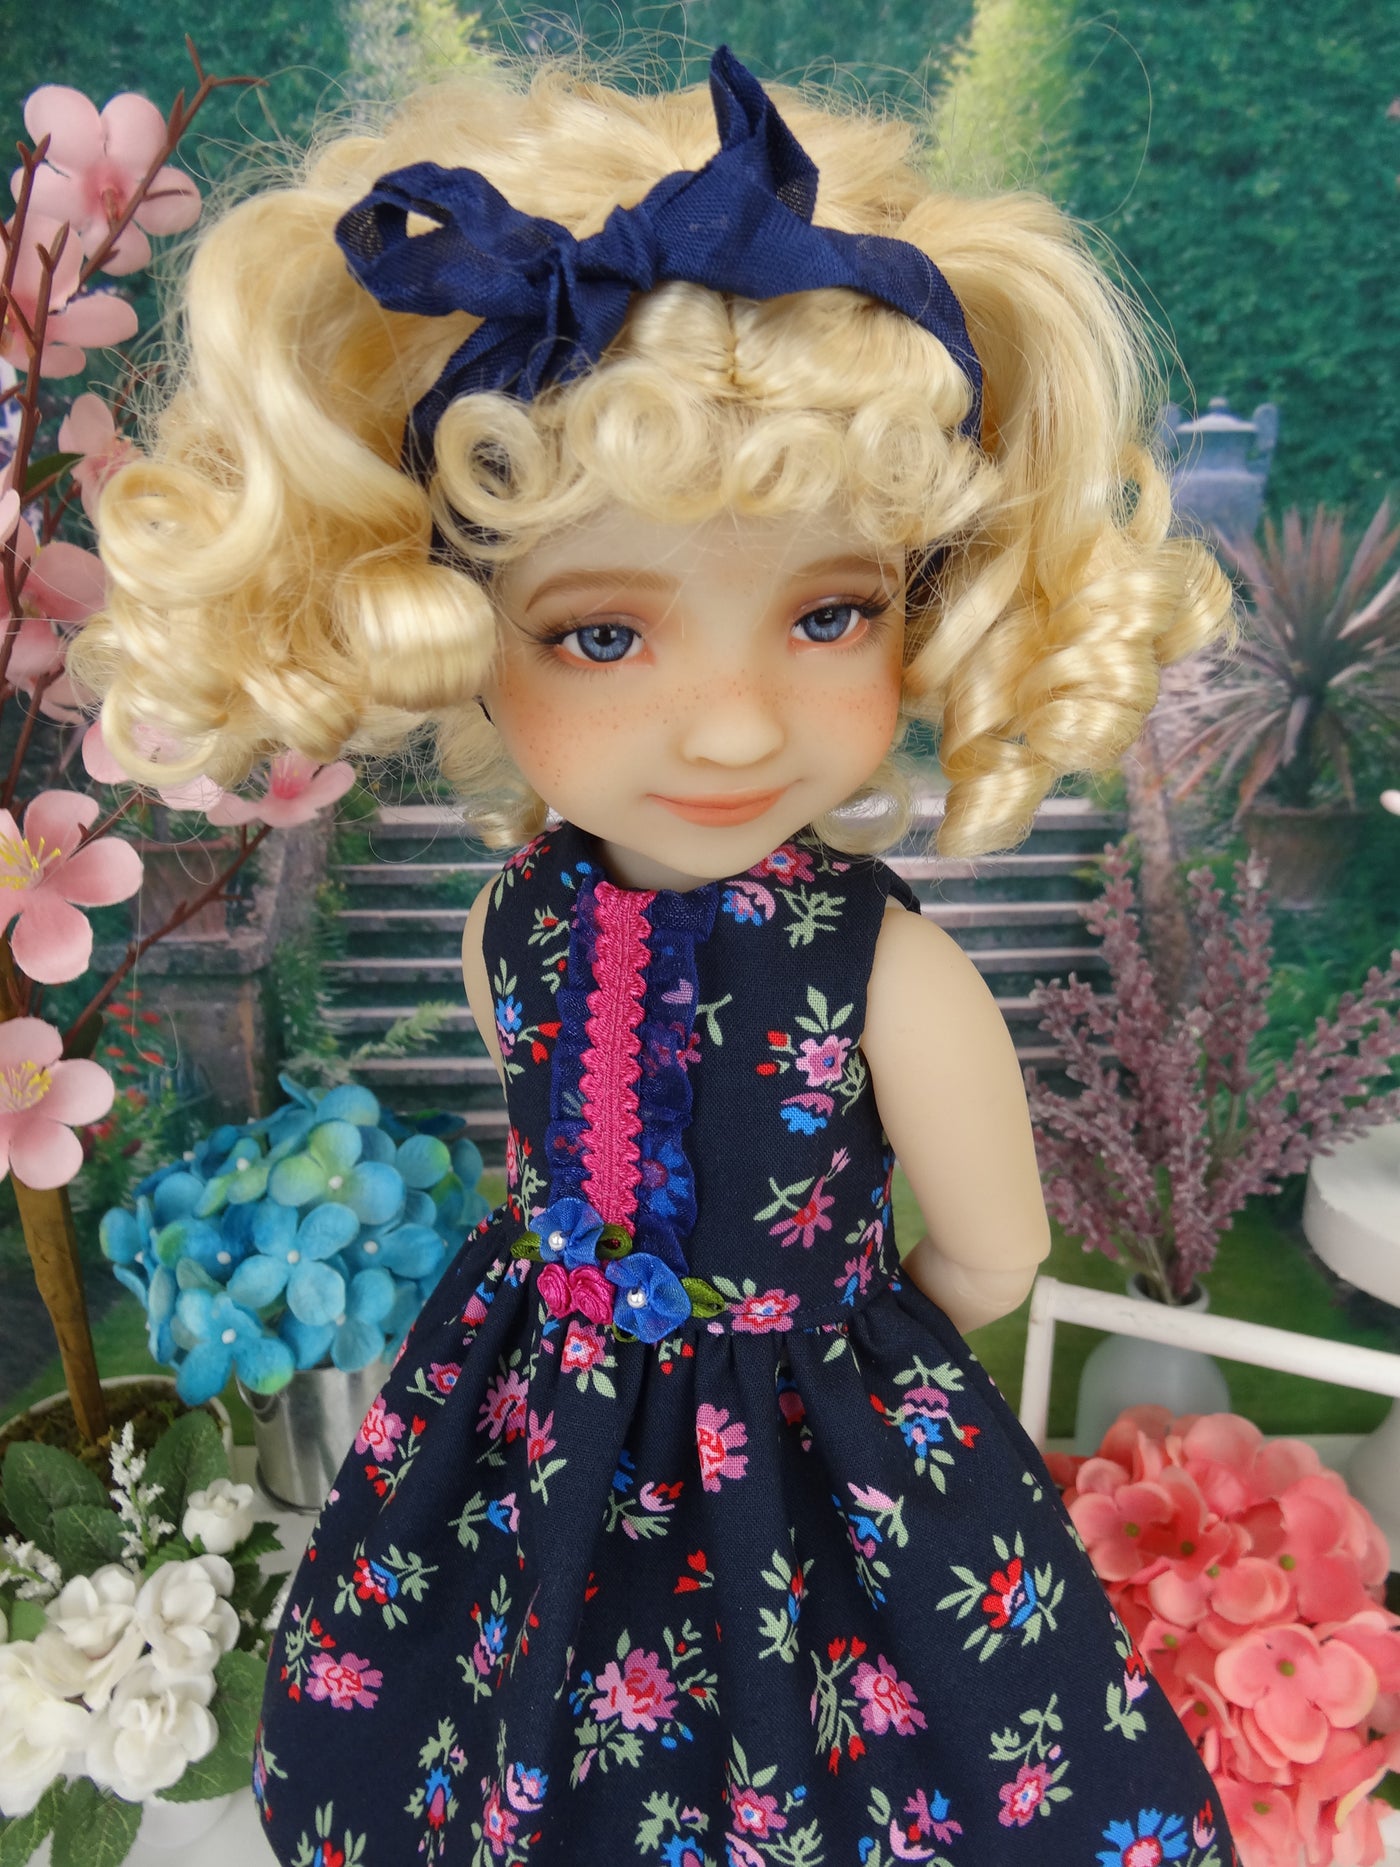 Russian Wildflowers - dress with shoes for Ruby Red Fashion Friends doll